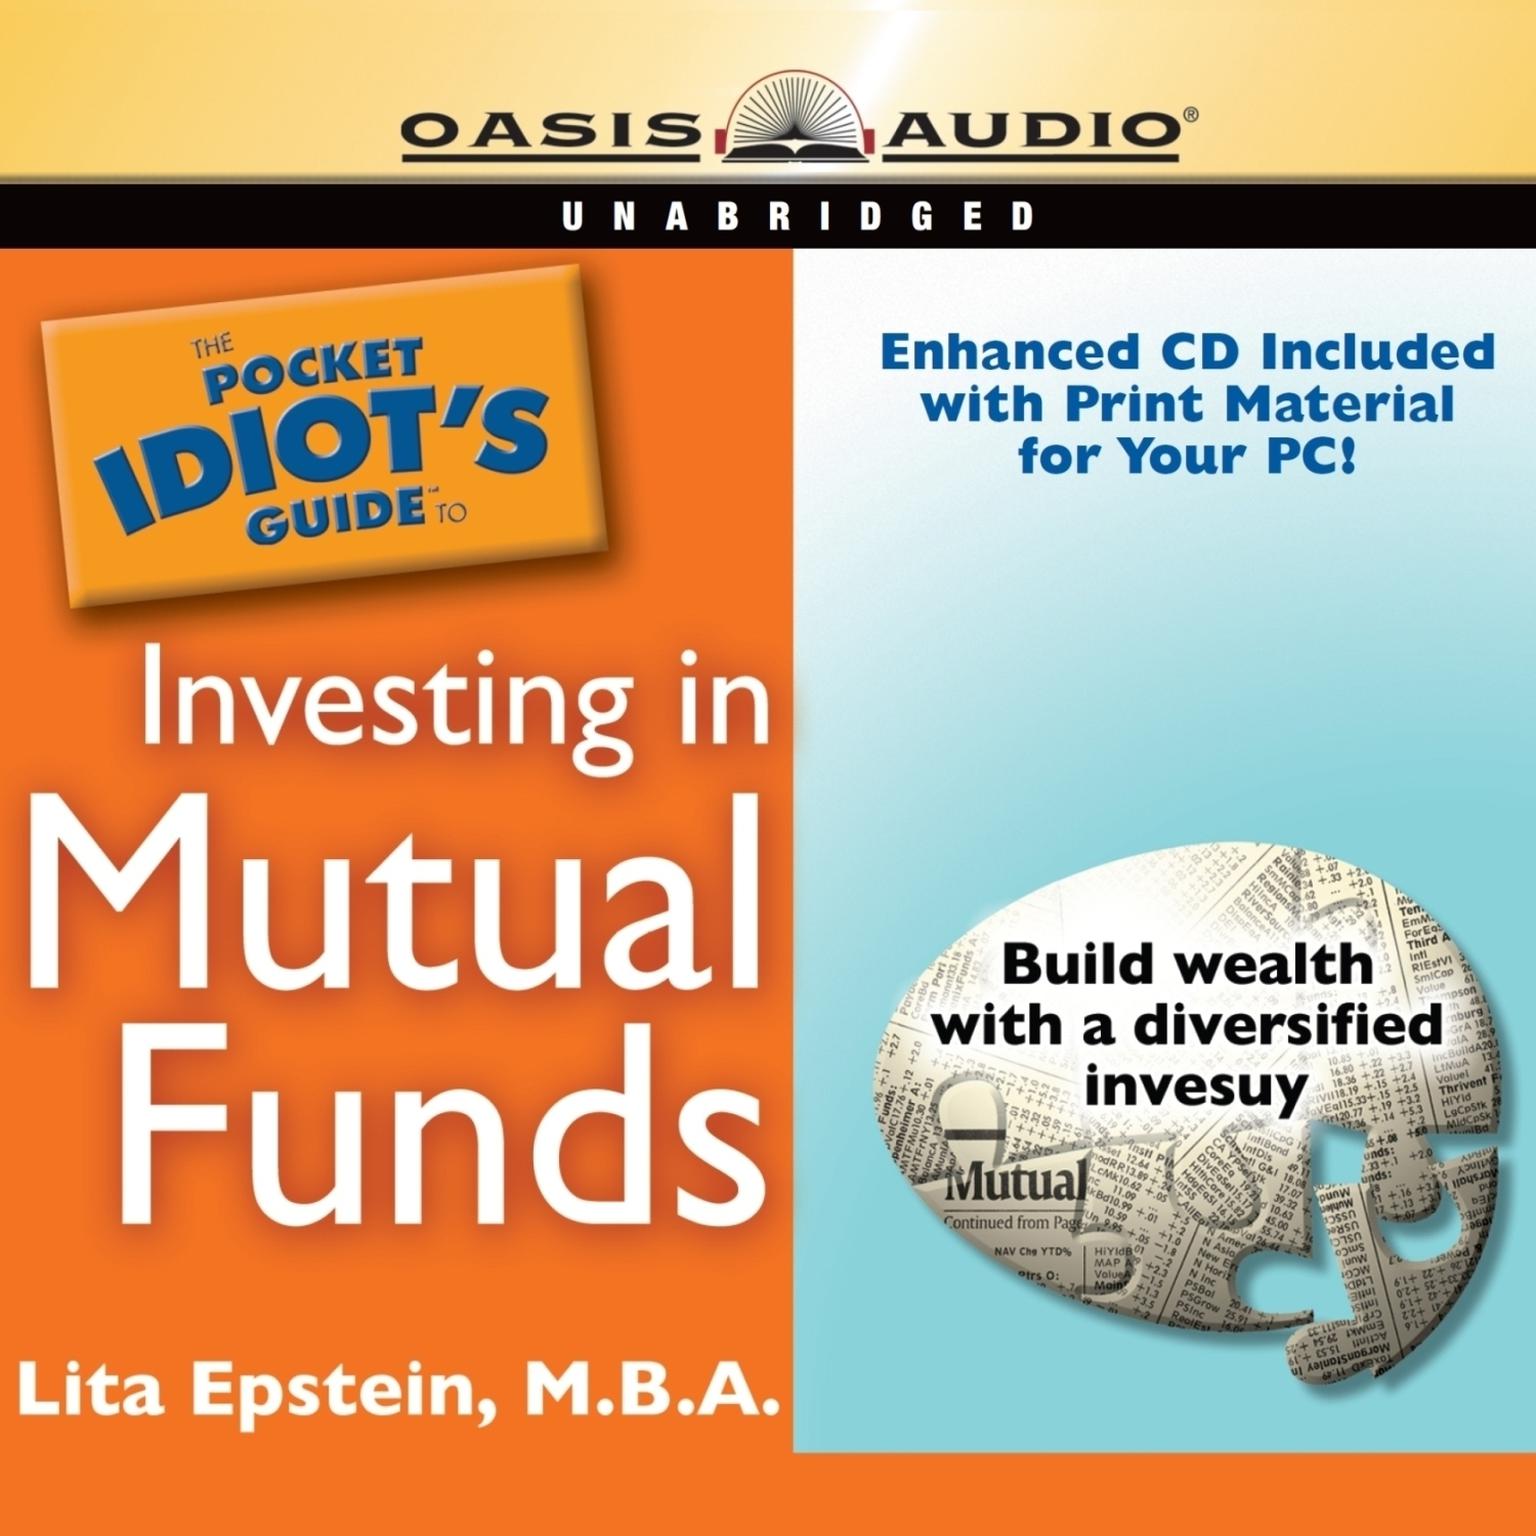 The Pocket Idiots Guide to Investing in Mutual Funds (Abridged) Audiobook, by Lita Epstein